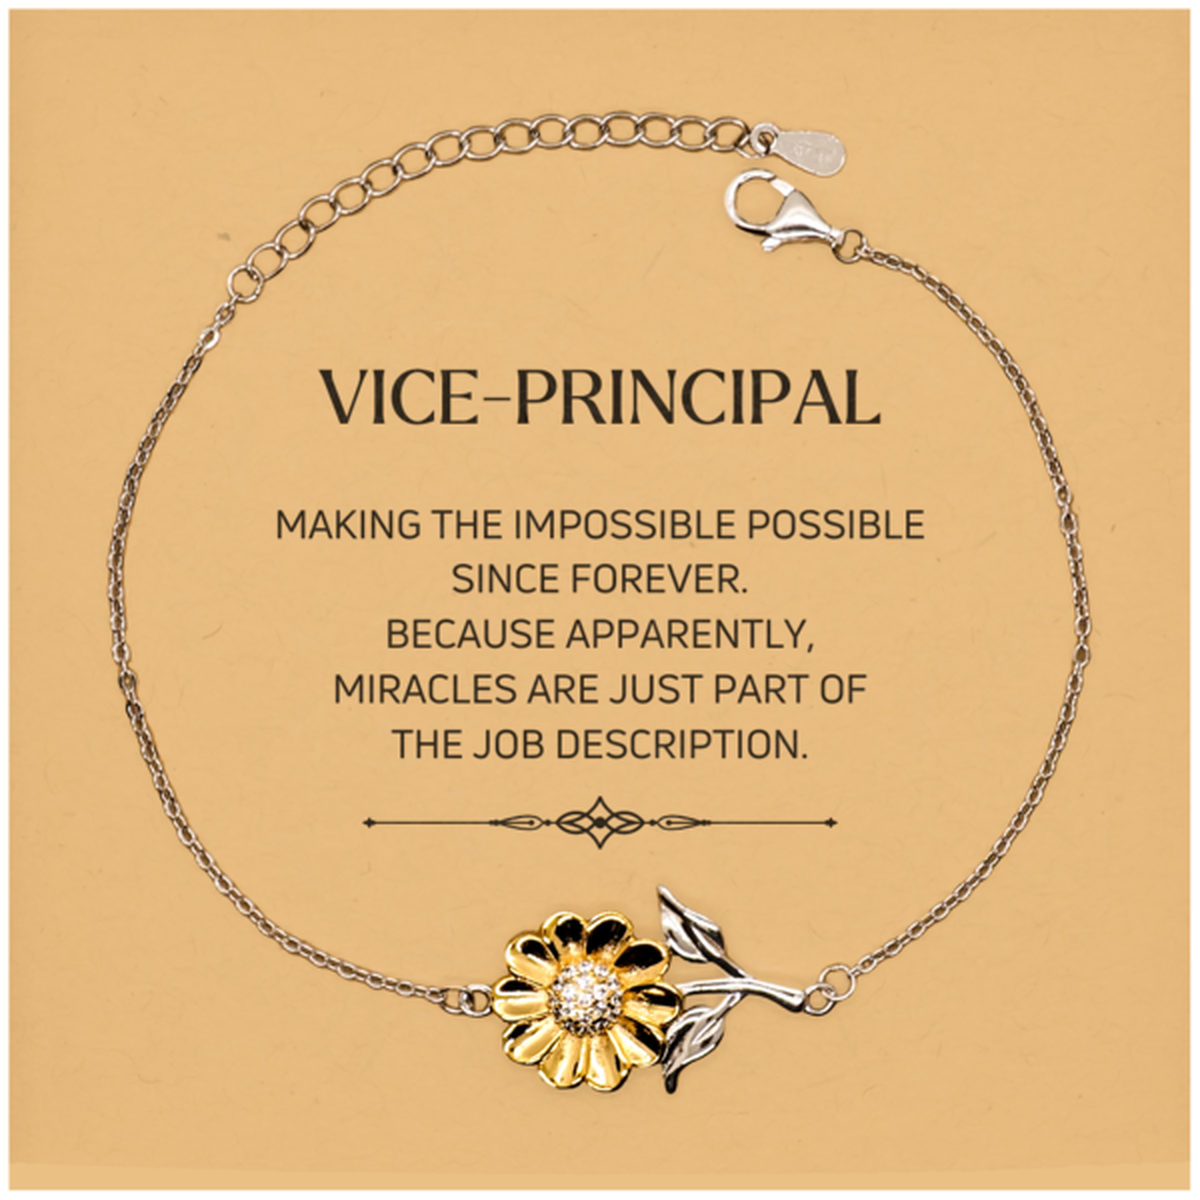 Funny Vice-principal Gifts, Miracles are just part of the job description, Inspirational Birthday Christmas Sunflower Bracelet For Vice-principal, Men, Women, Coworkers, Friends, Boss